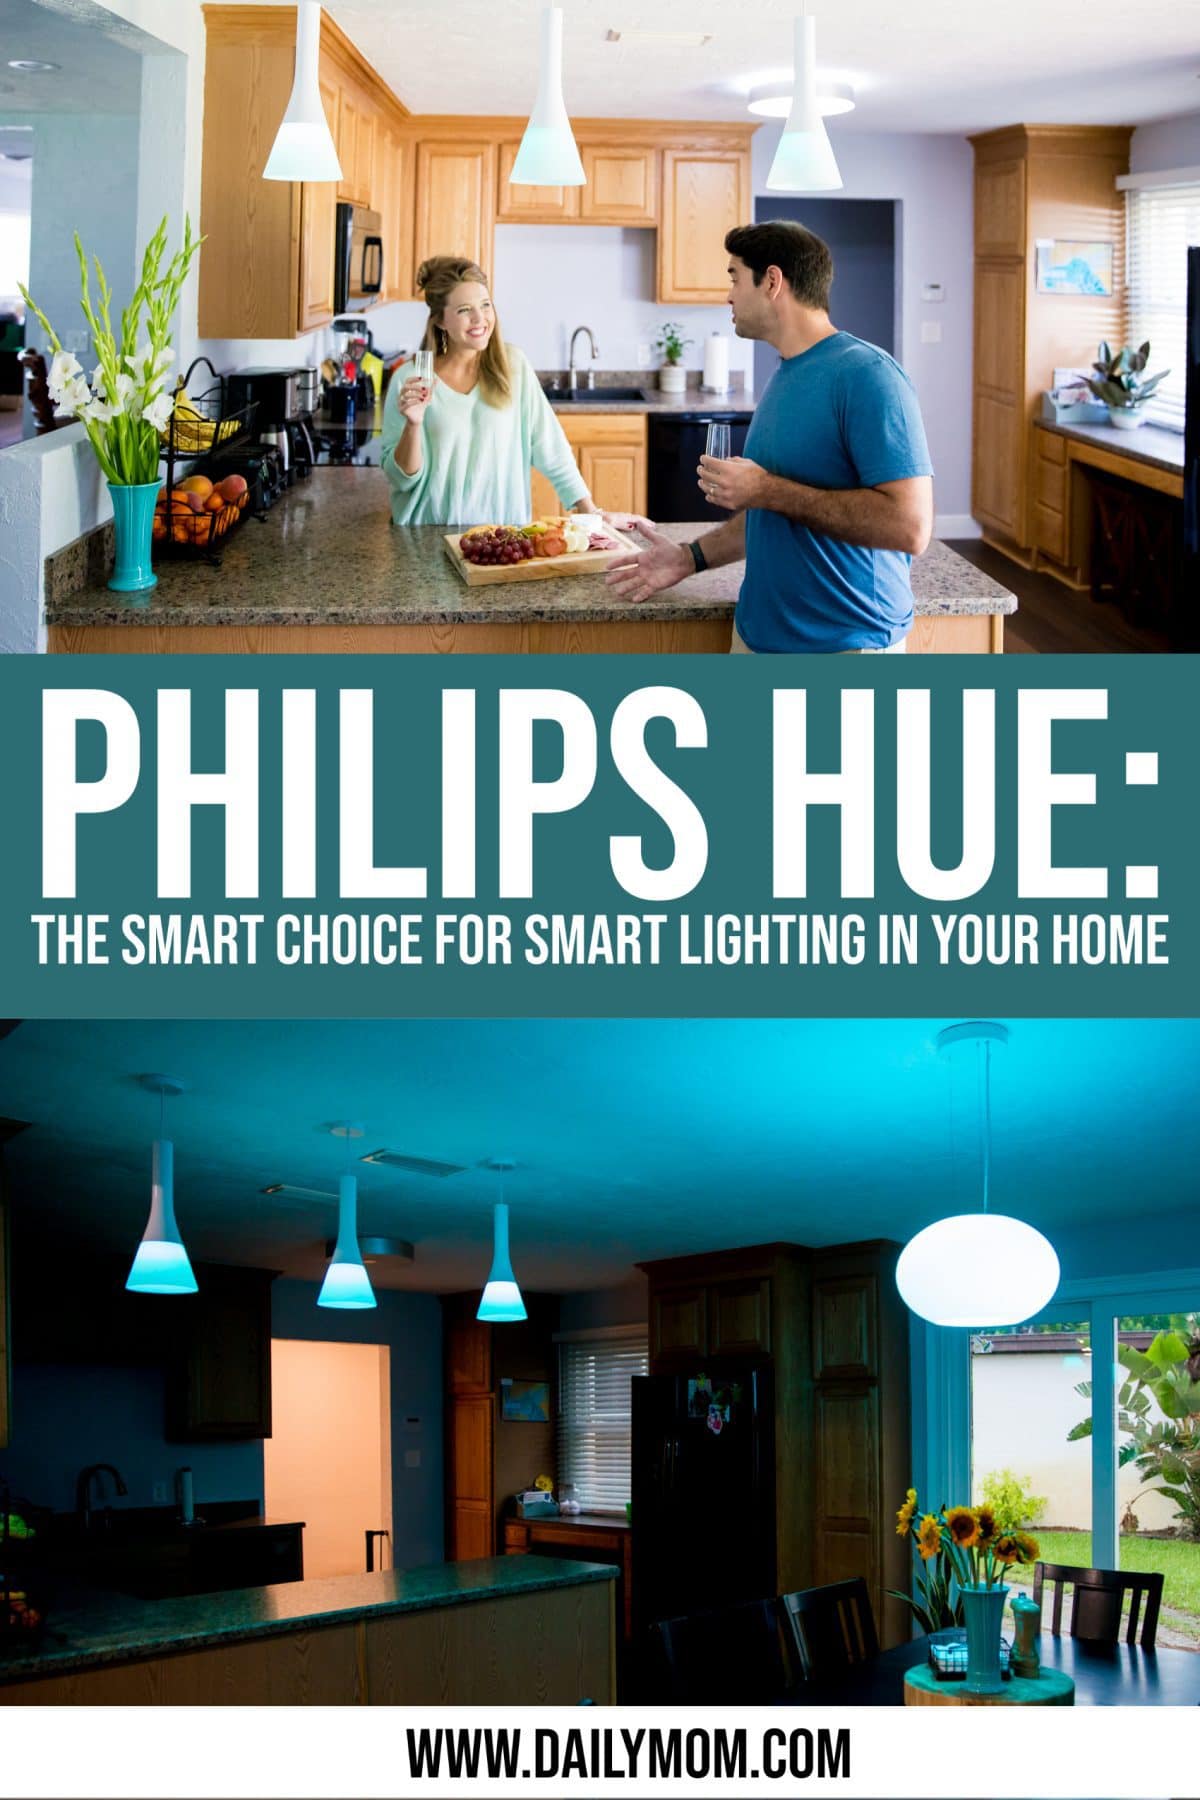 Philips Hue: The Smart Choice For Smart Lighting In Your Home